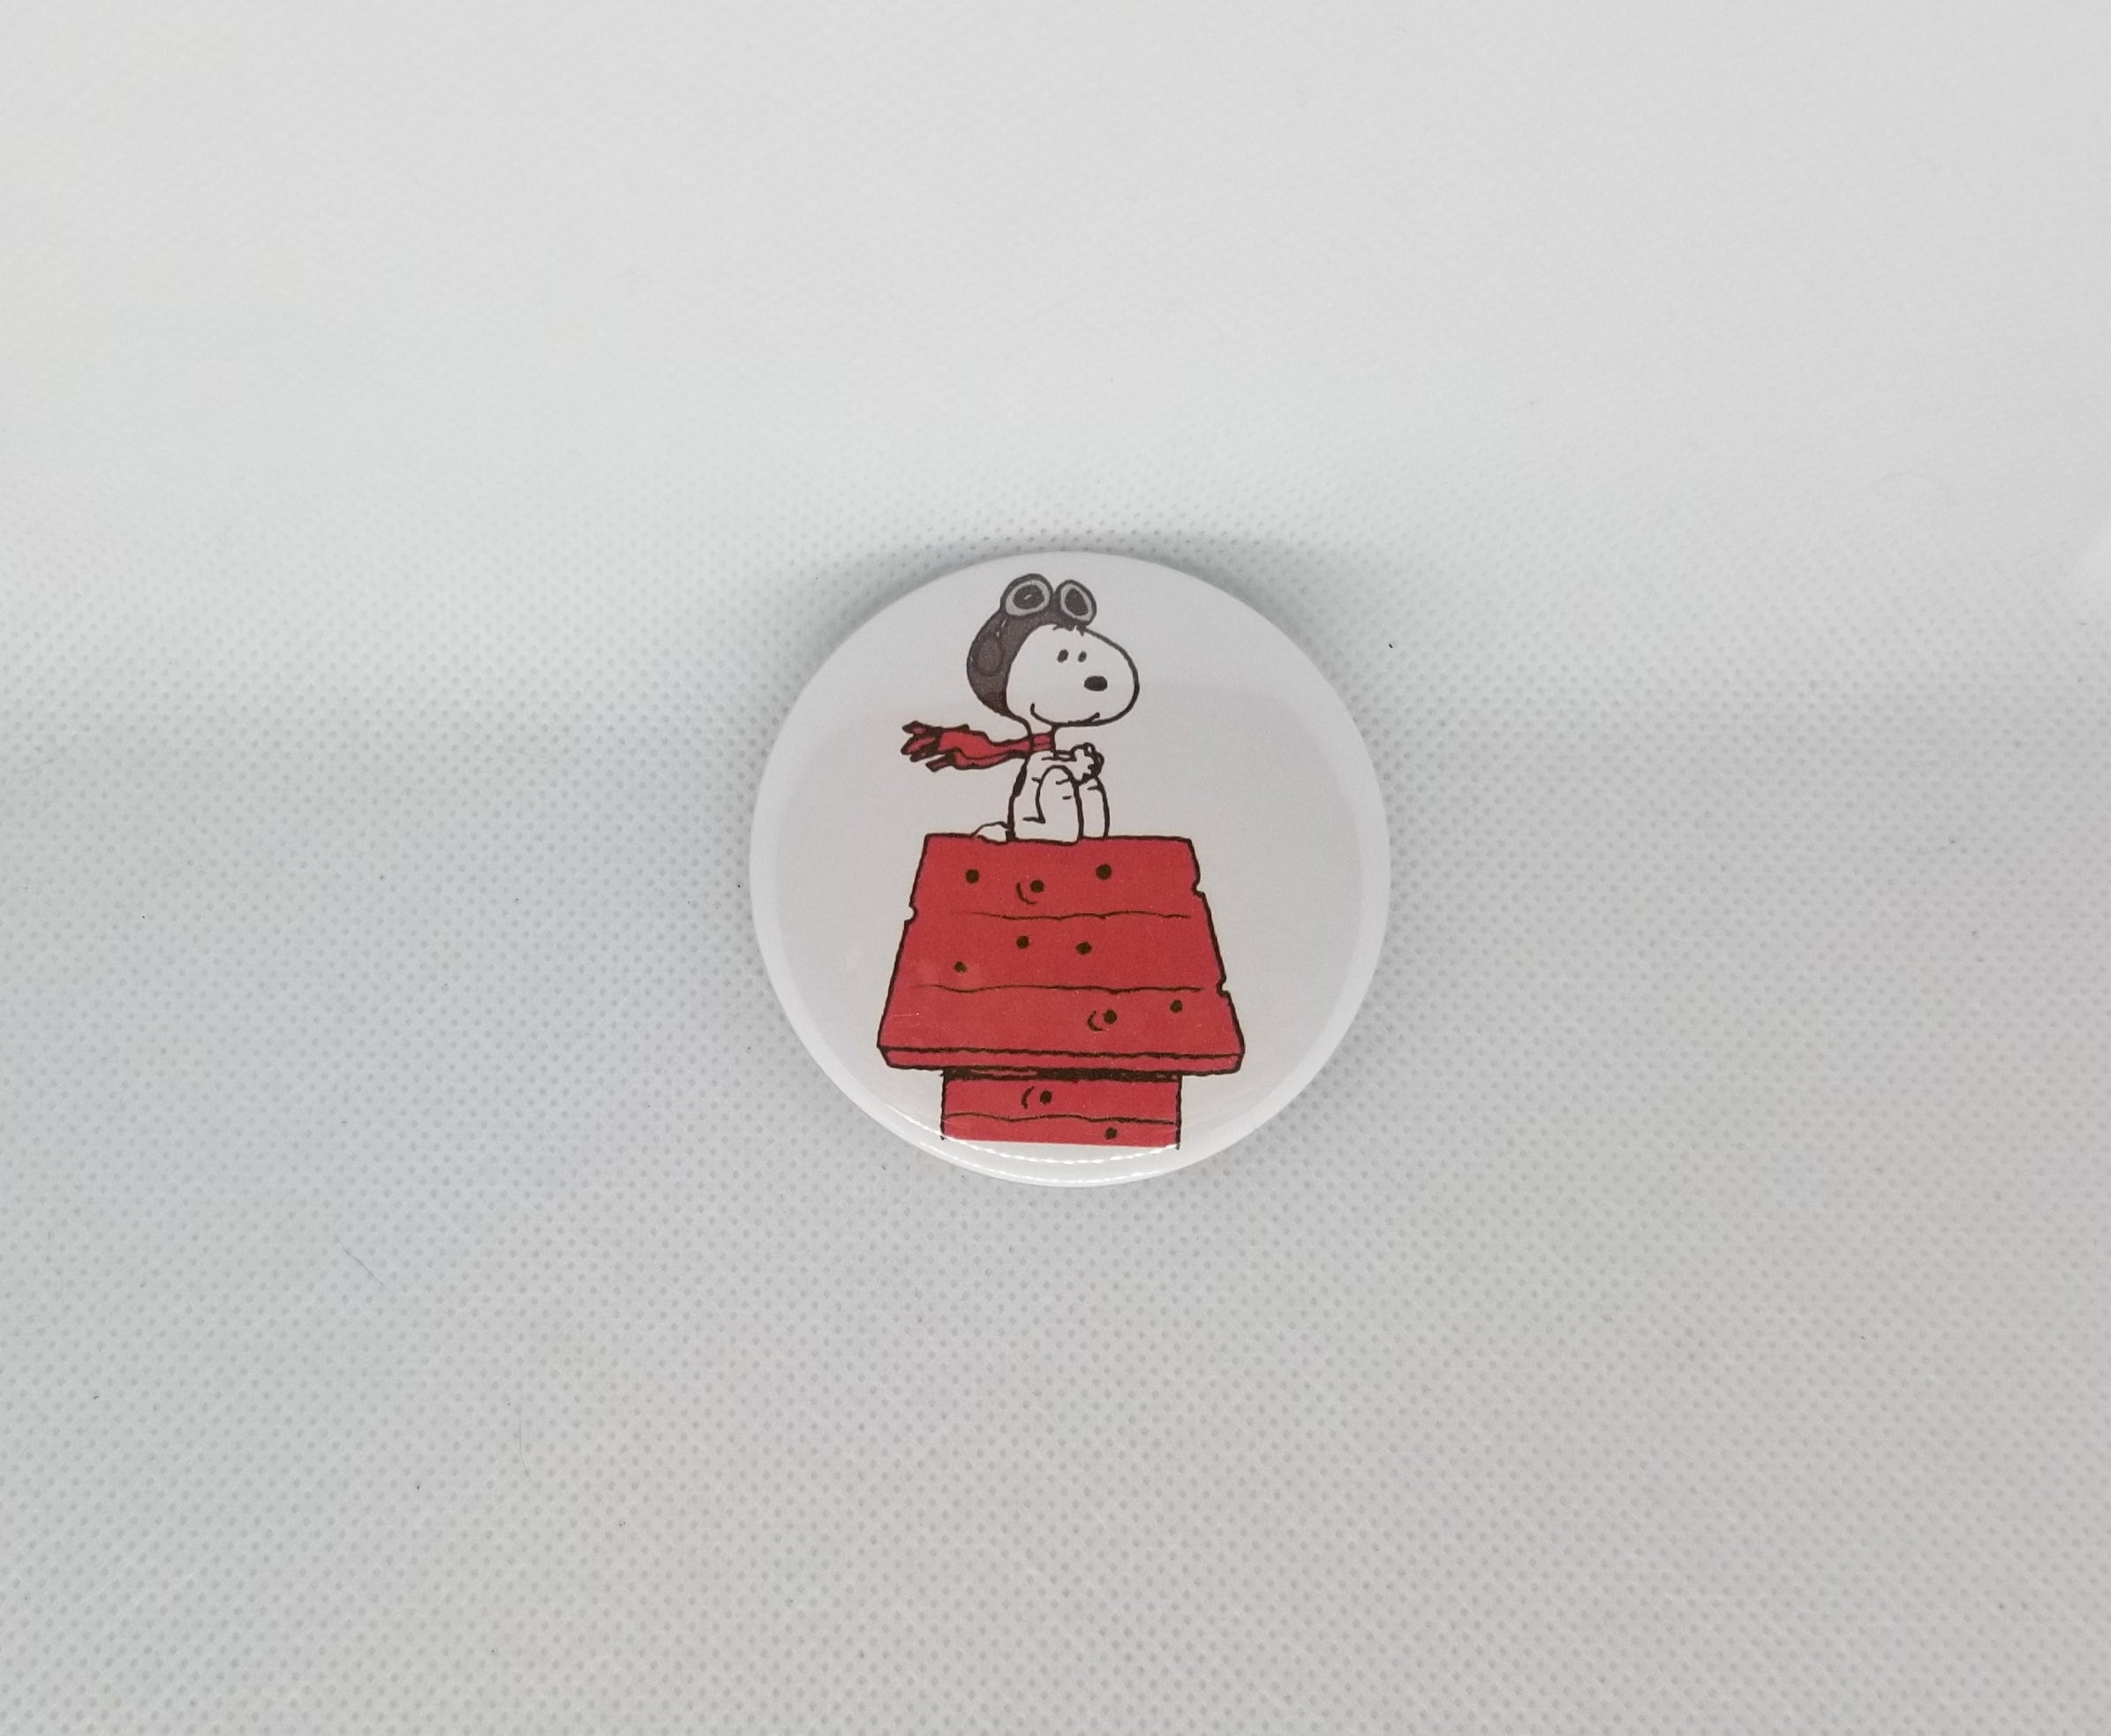 Adorable Peanuts Snoopy VS the Red Baron Pin Button Mirror Magnet